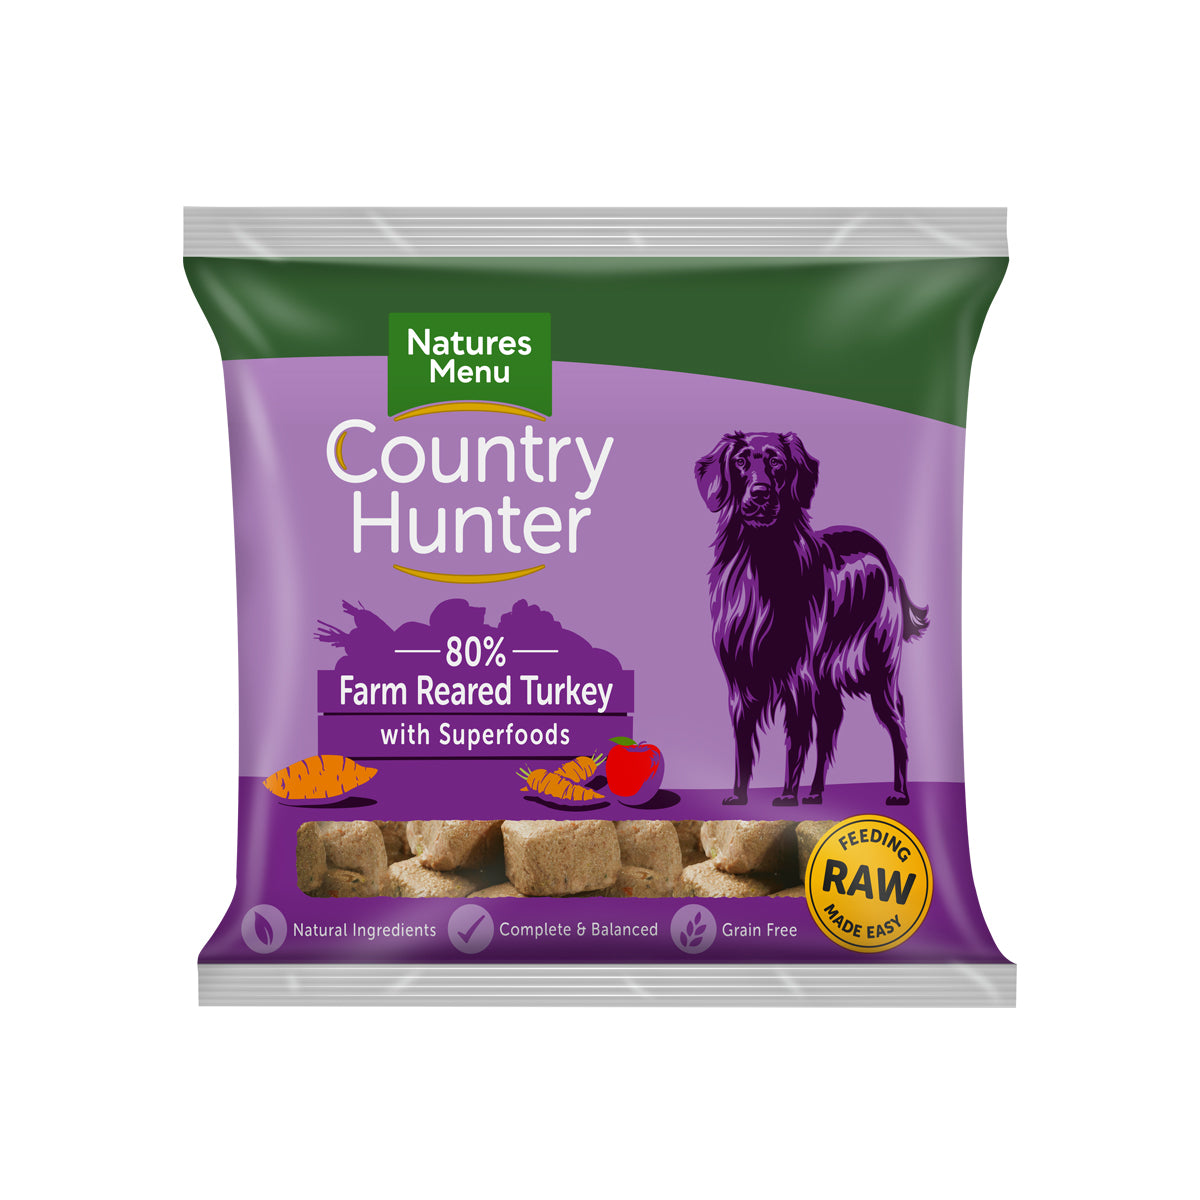 Natures Menu Country Hunter Raw Nuggets Farm Reared Turkey For Dogs 1kg